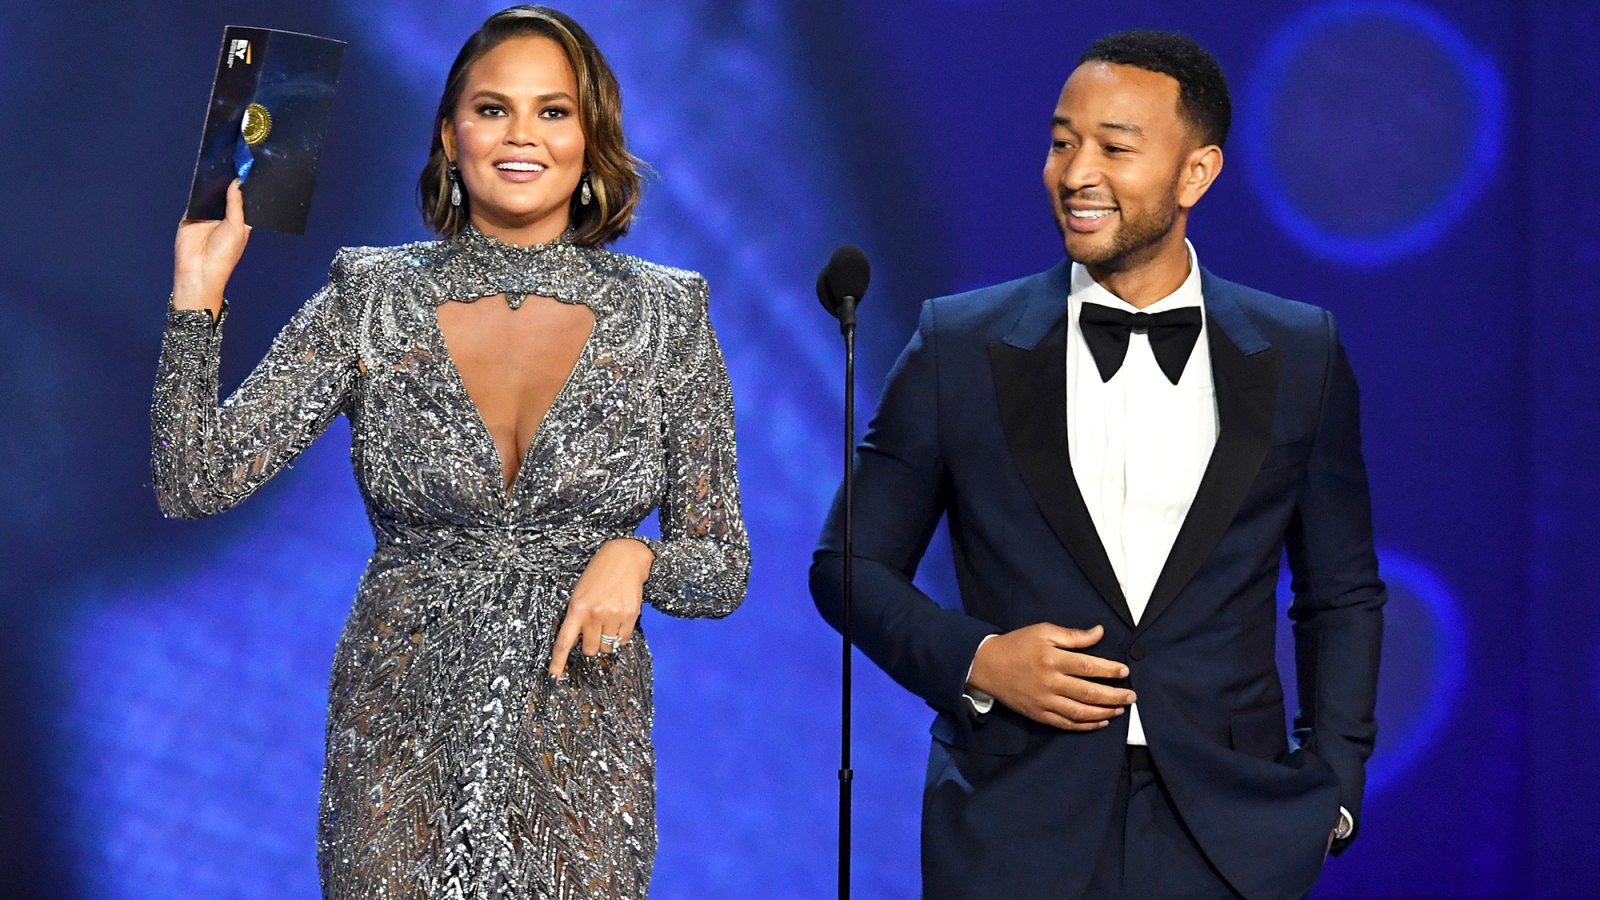 Chrissy Teigen Claps Back at Emmys Viewer Who Thinks She’s Pregnant